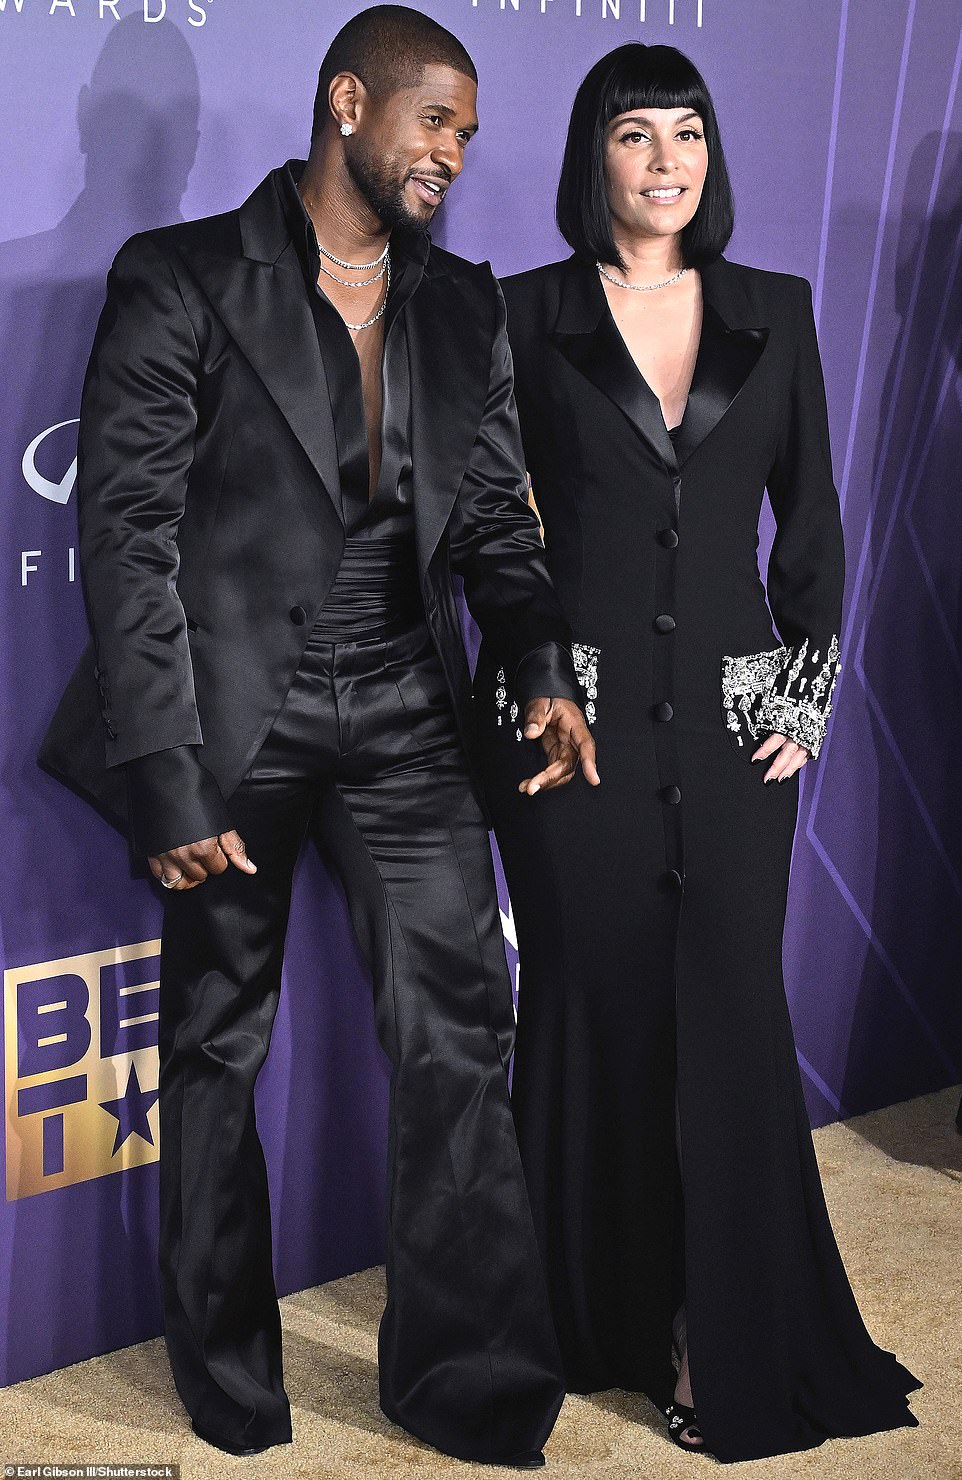 Usher, the recipient of Saturday night's coveted presidential award, held hands with his third and latest wife Jennifer Goicoechea just weeks after the news of their marriage in Las Vegas.